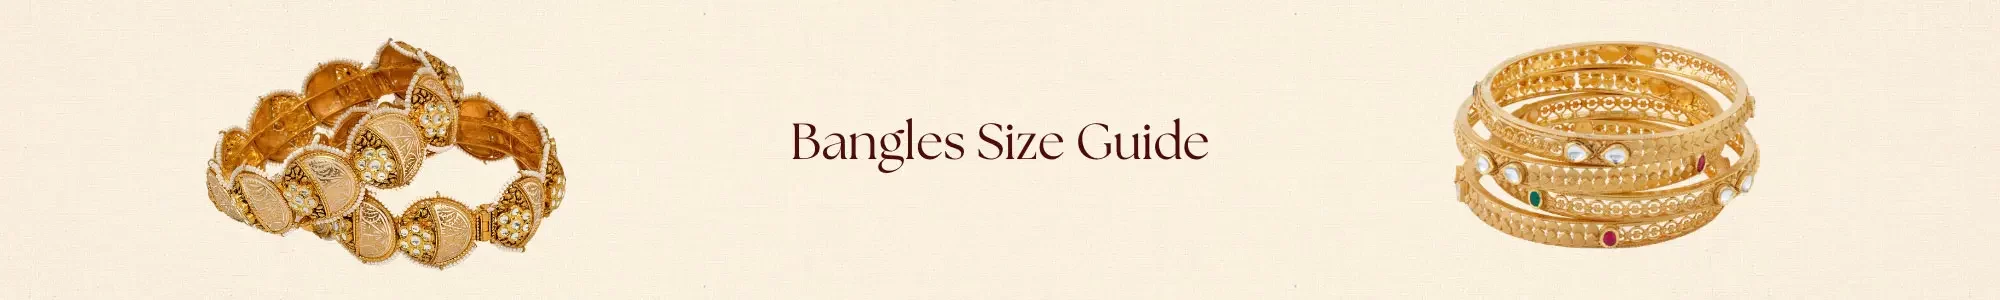 bangles size guide